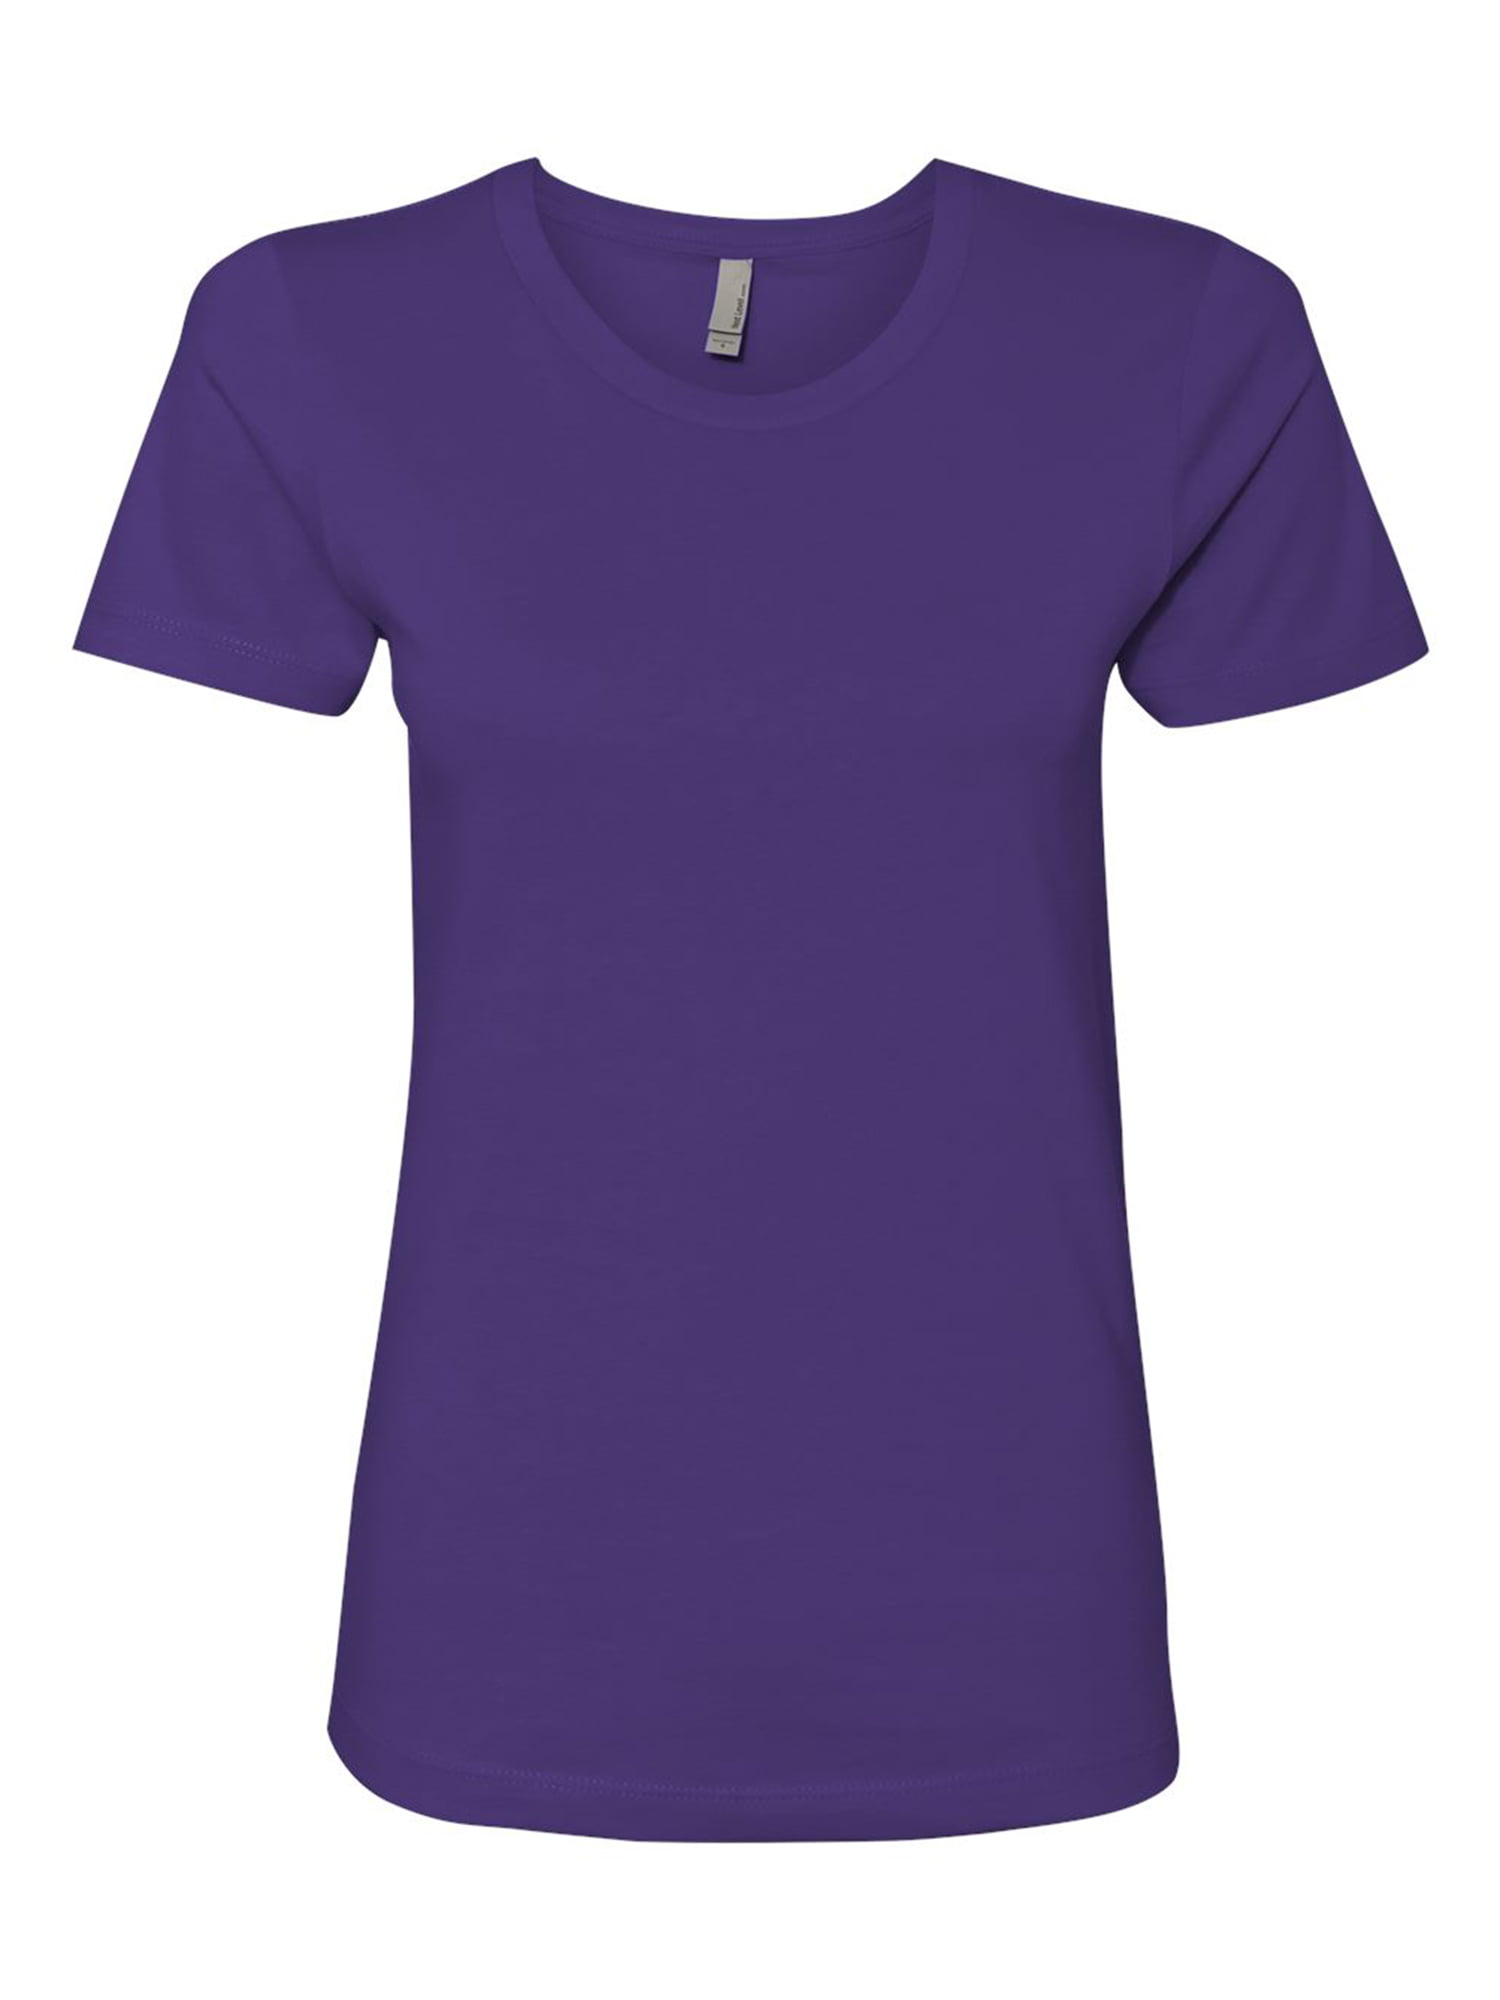 Fashion Blouse Clothes L6Nv4o@A Girls Short Sleeve Lavender Purple Solid Color T-Shirts XS-XL